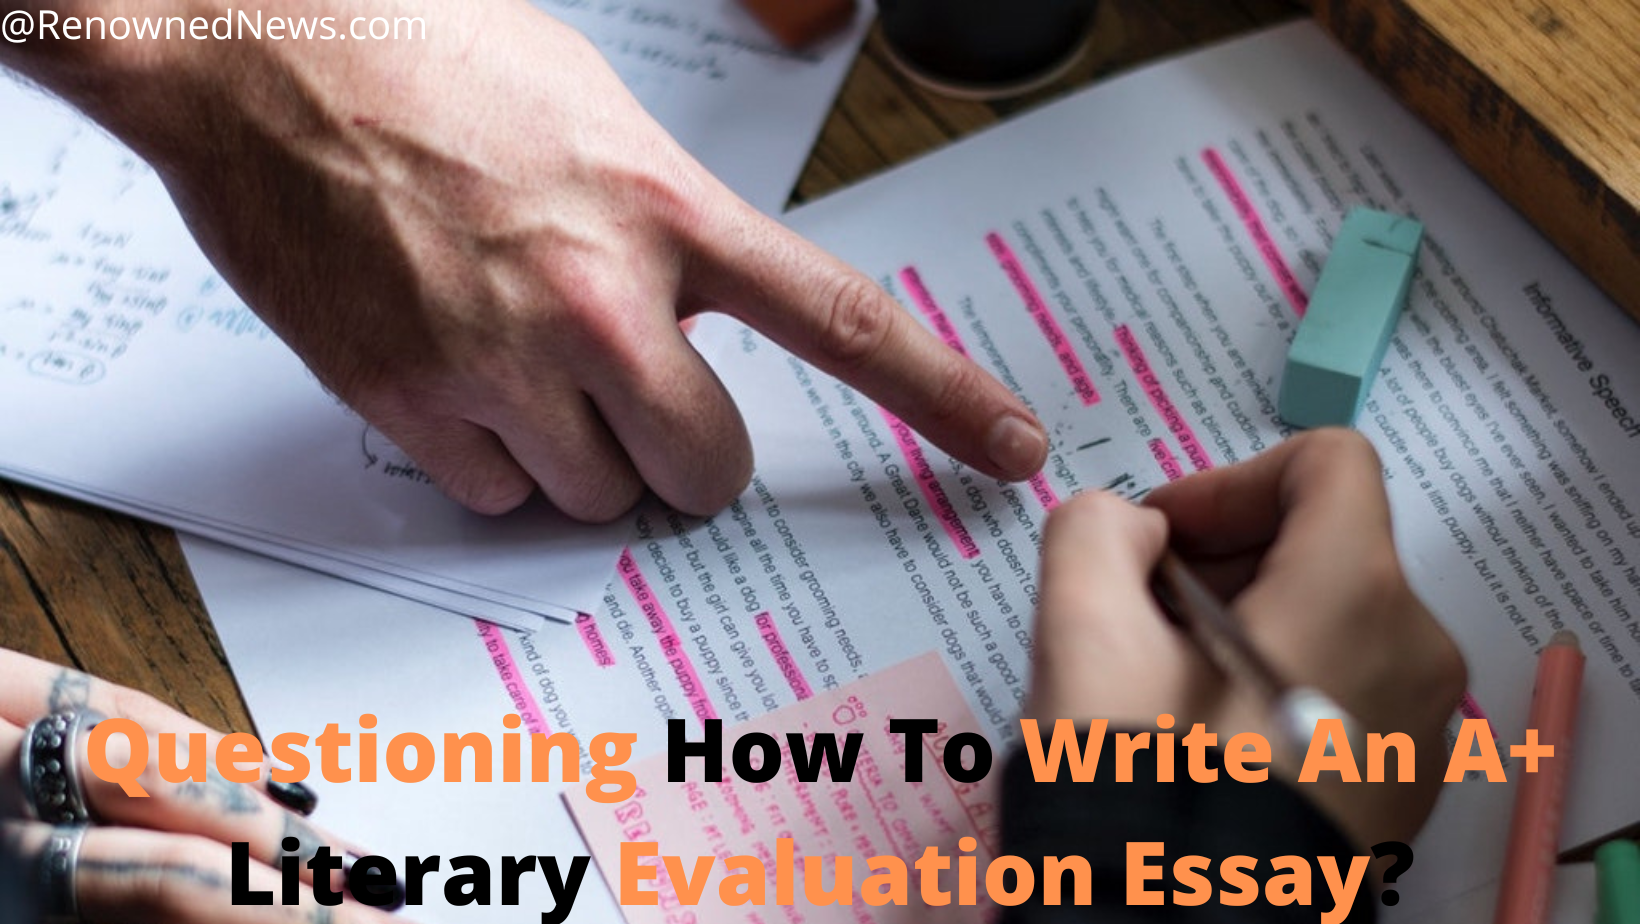 Questioning How To Write An A+ Literary Evaluation Essay?